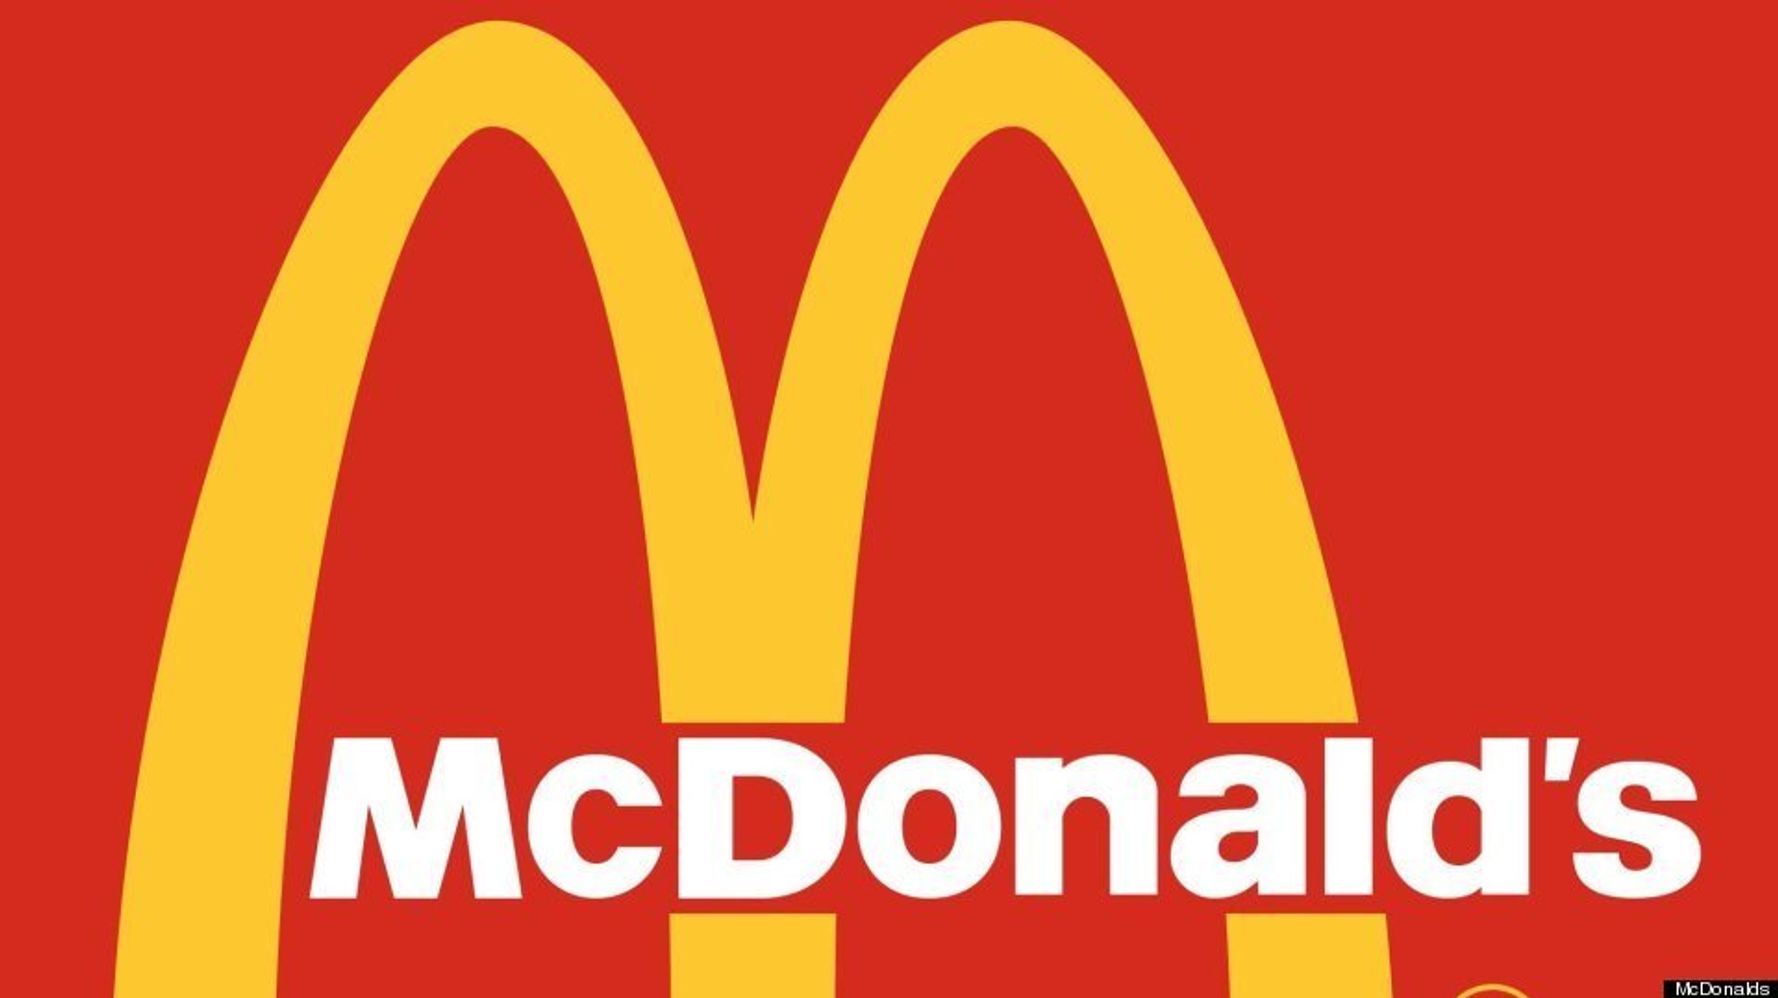 McDonald’s Slogan In 2022 (History, Meanings + More)